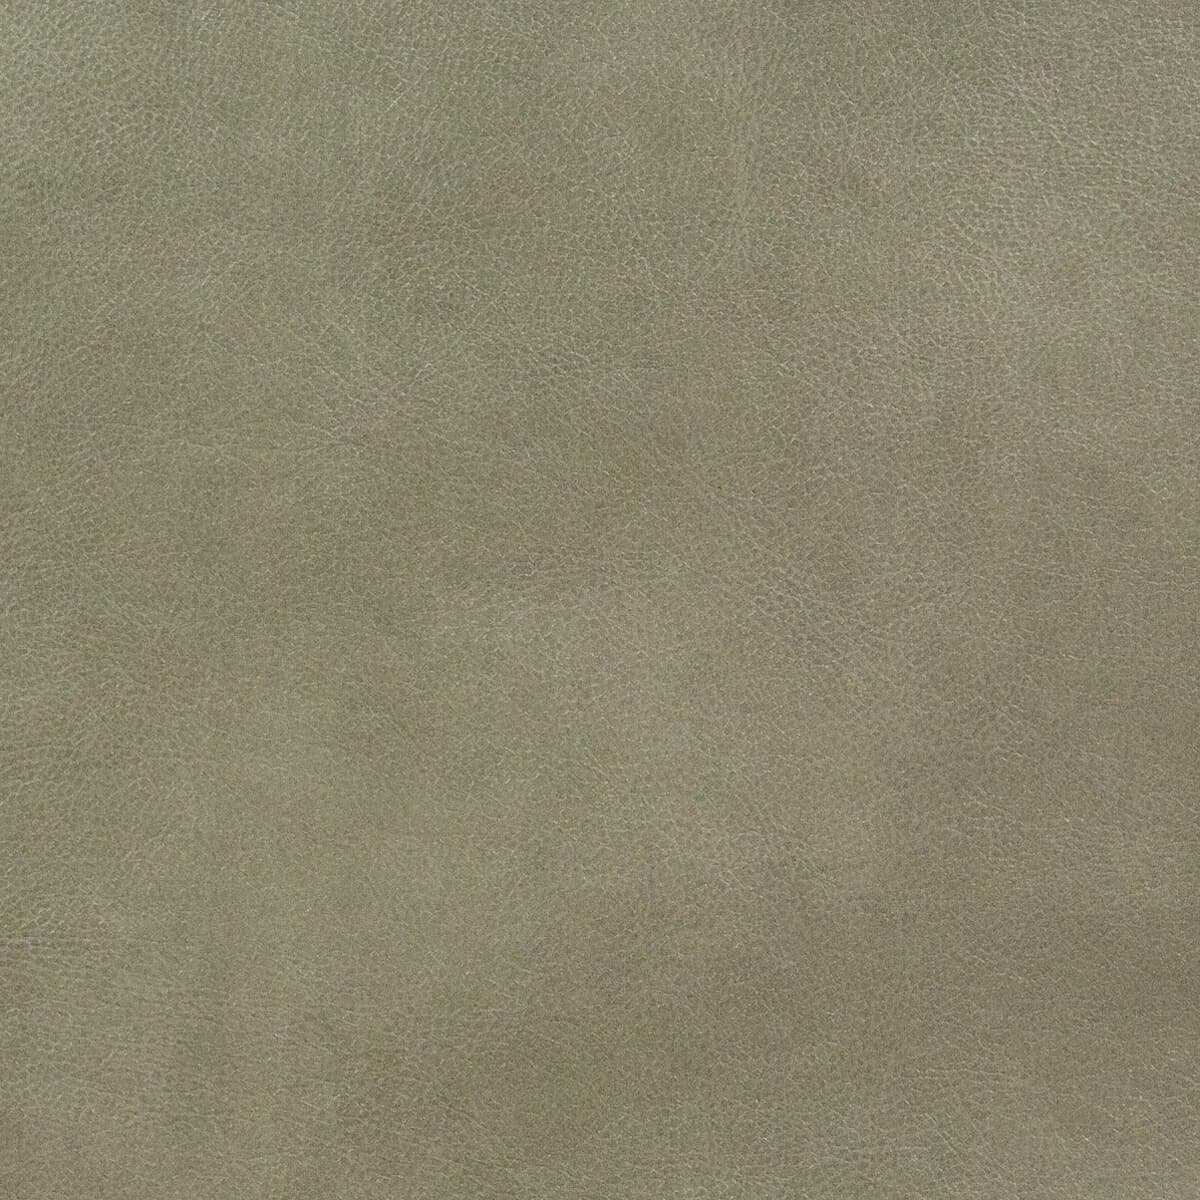 Turco 1 Stone by Stout Fabric